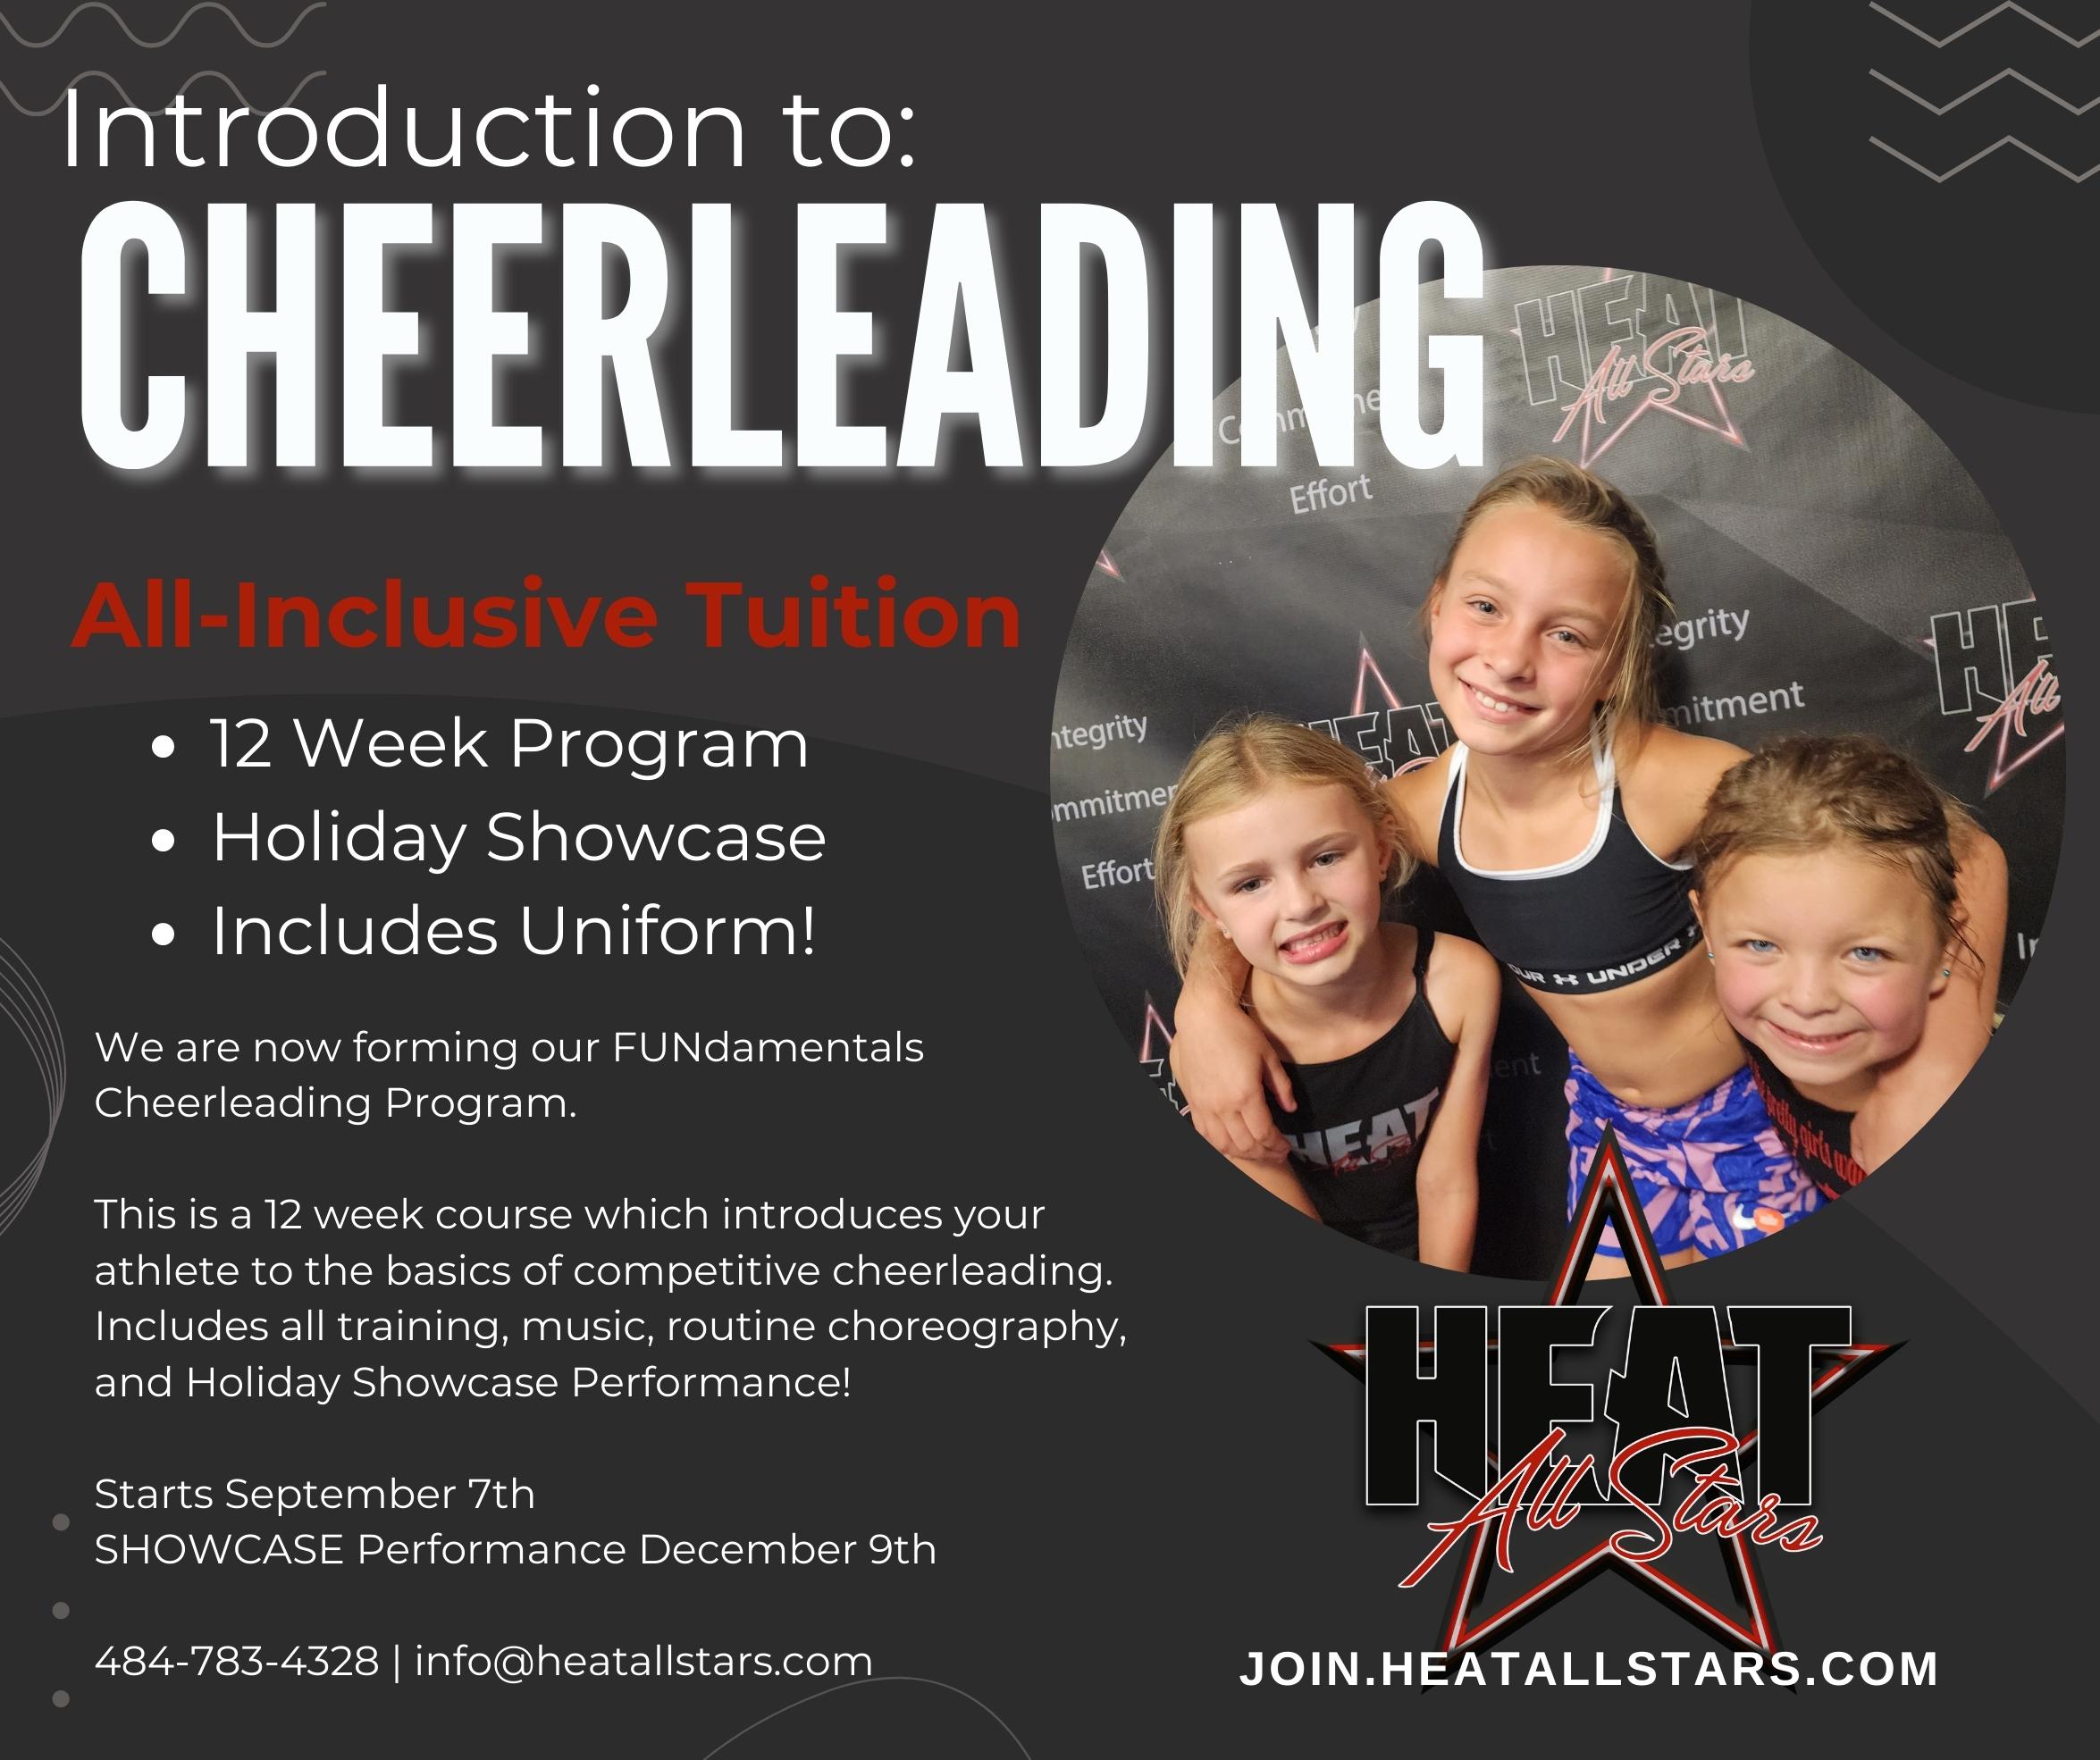 Introduction to CHEERLEADING